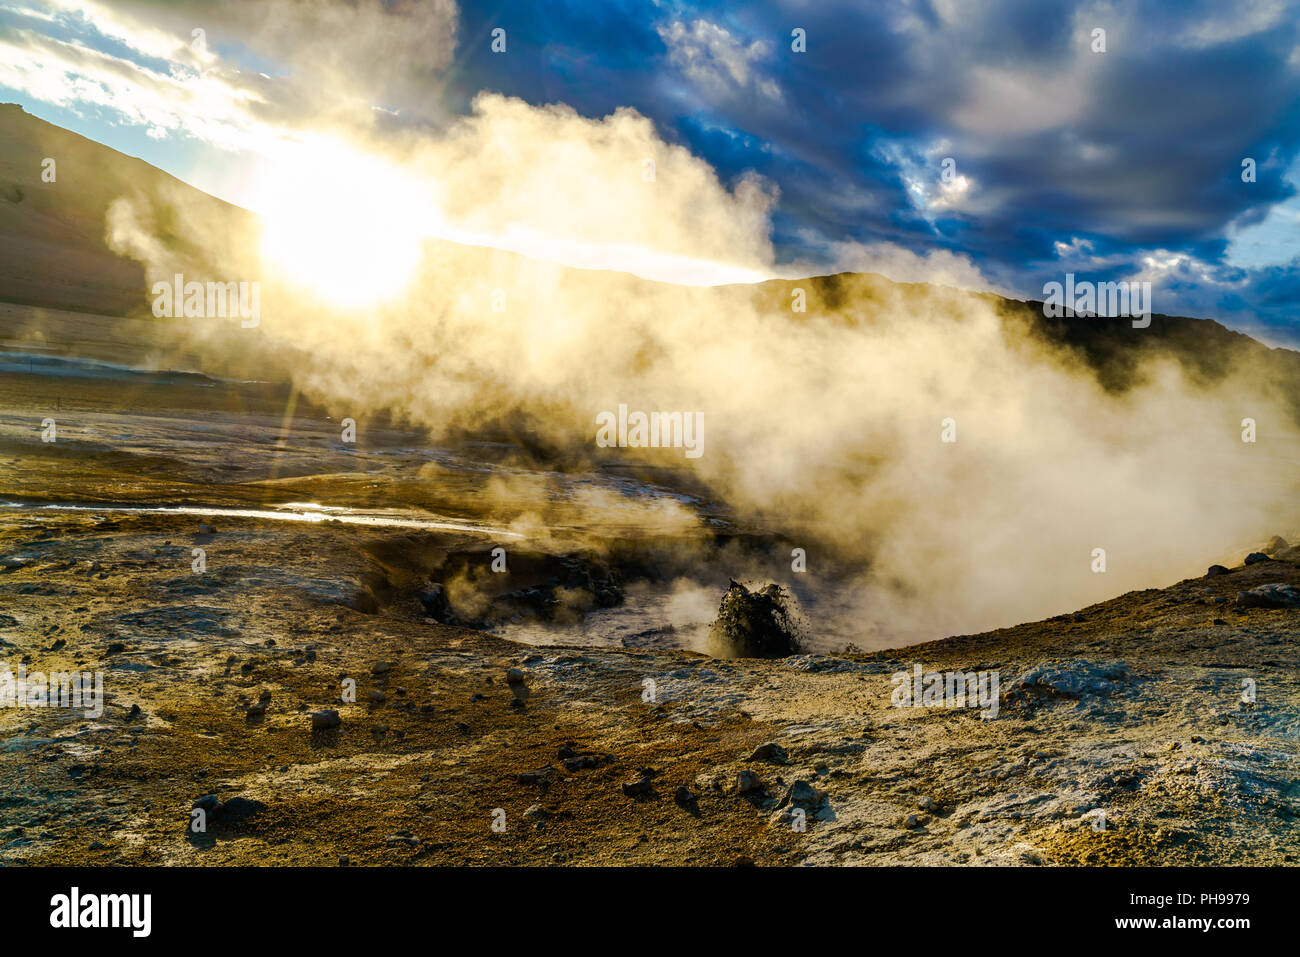 Boiling mud at Hverir geothermal area Stock Photo